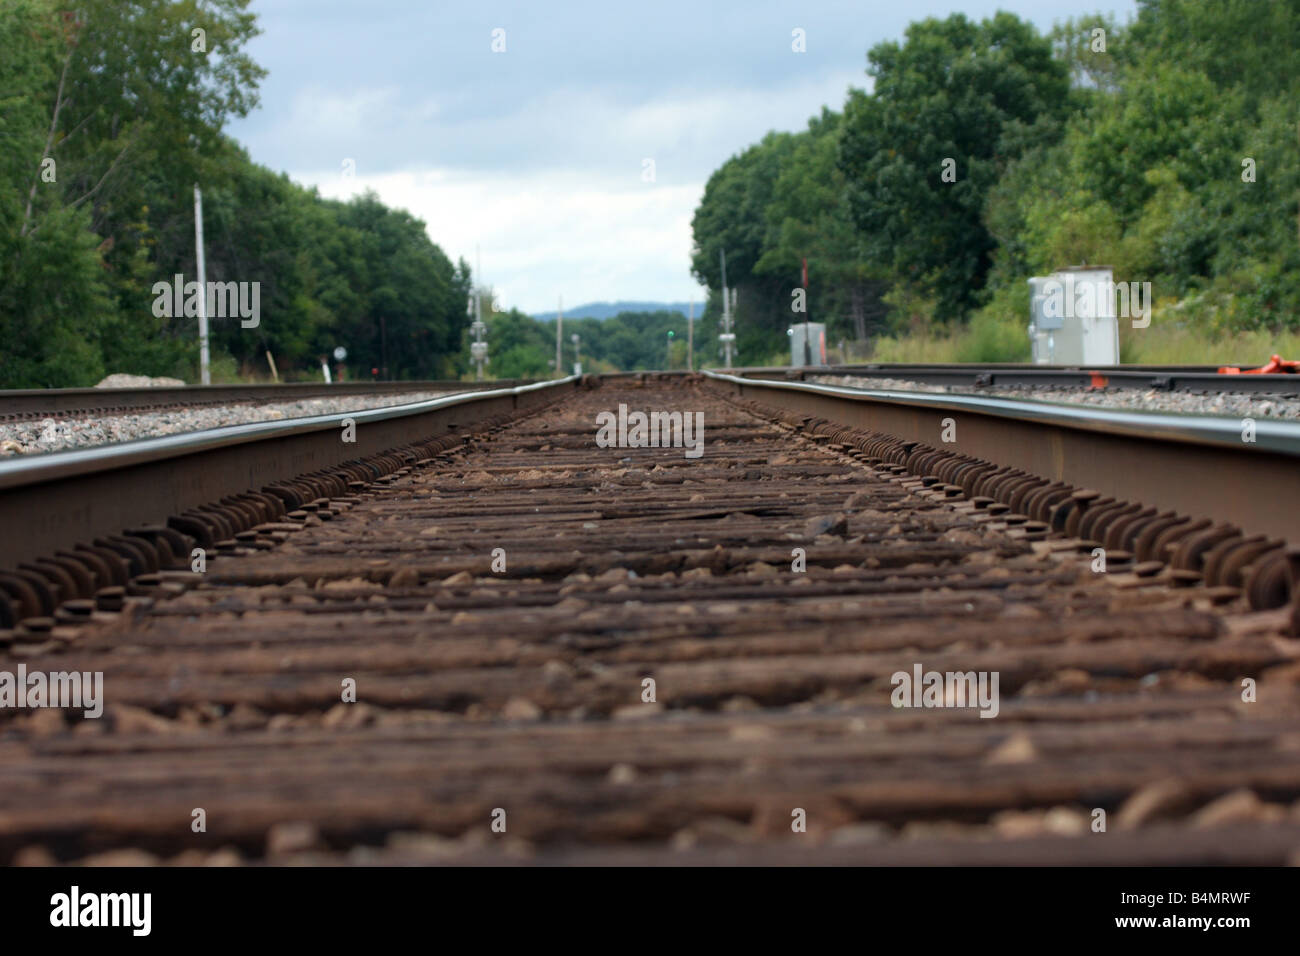 Railroad ties in foreground in focus Stock Photo